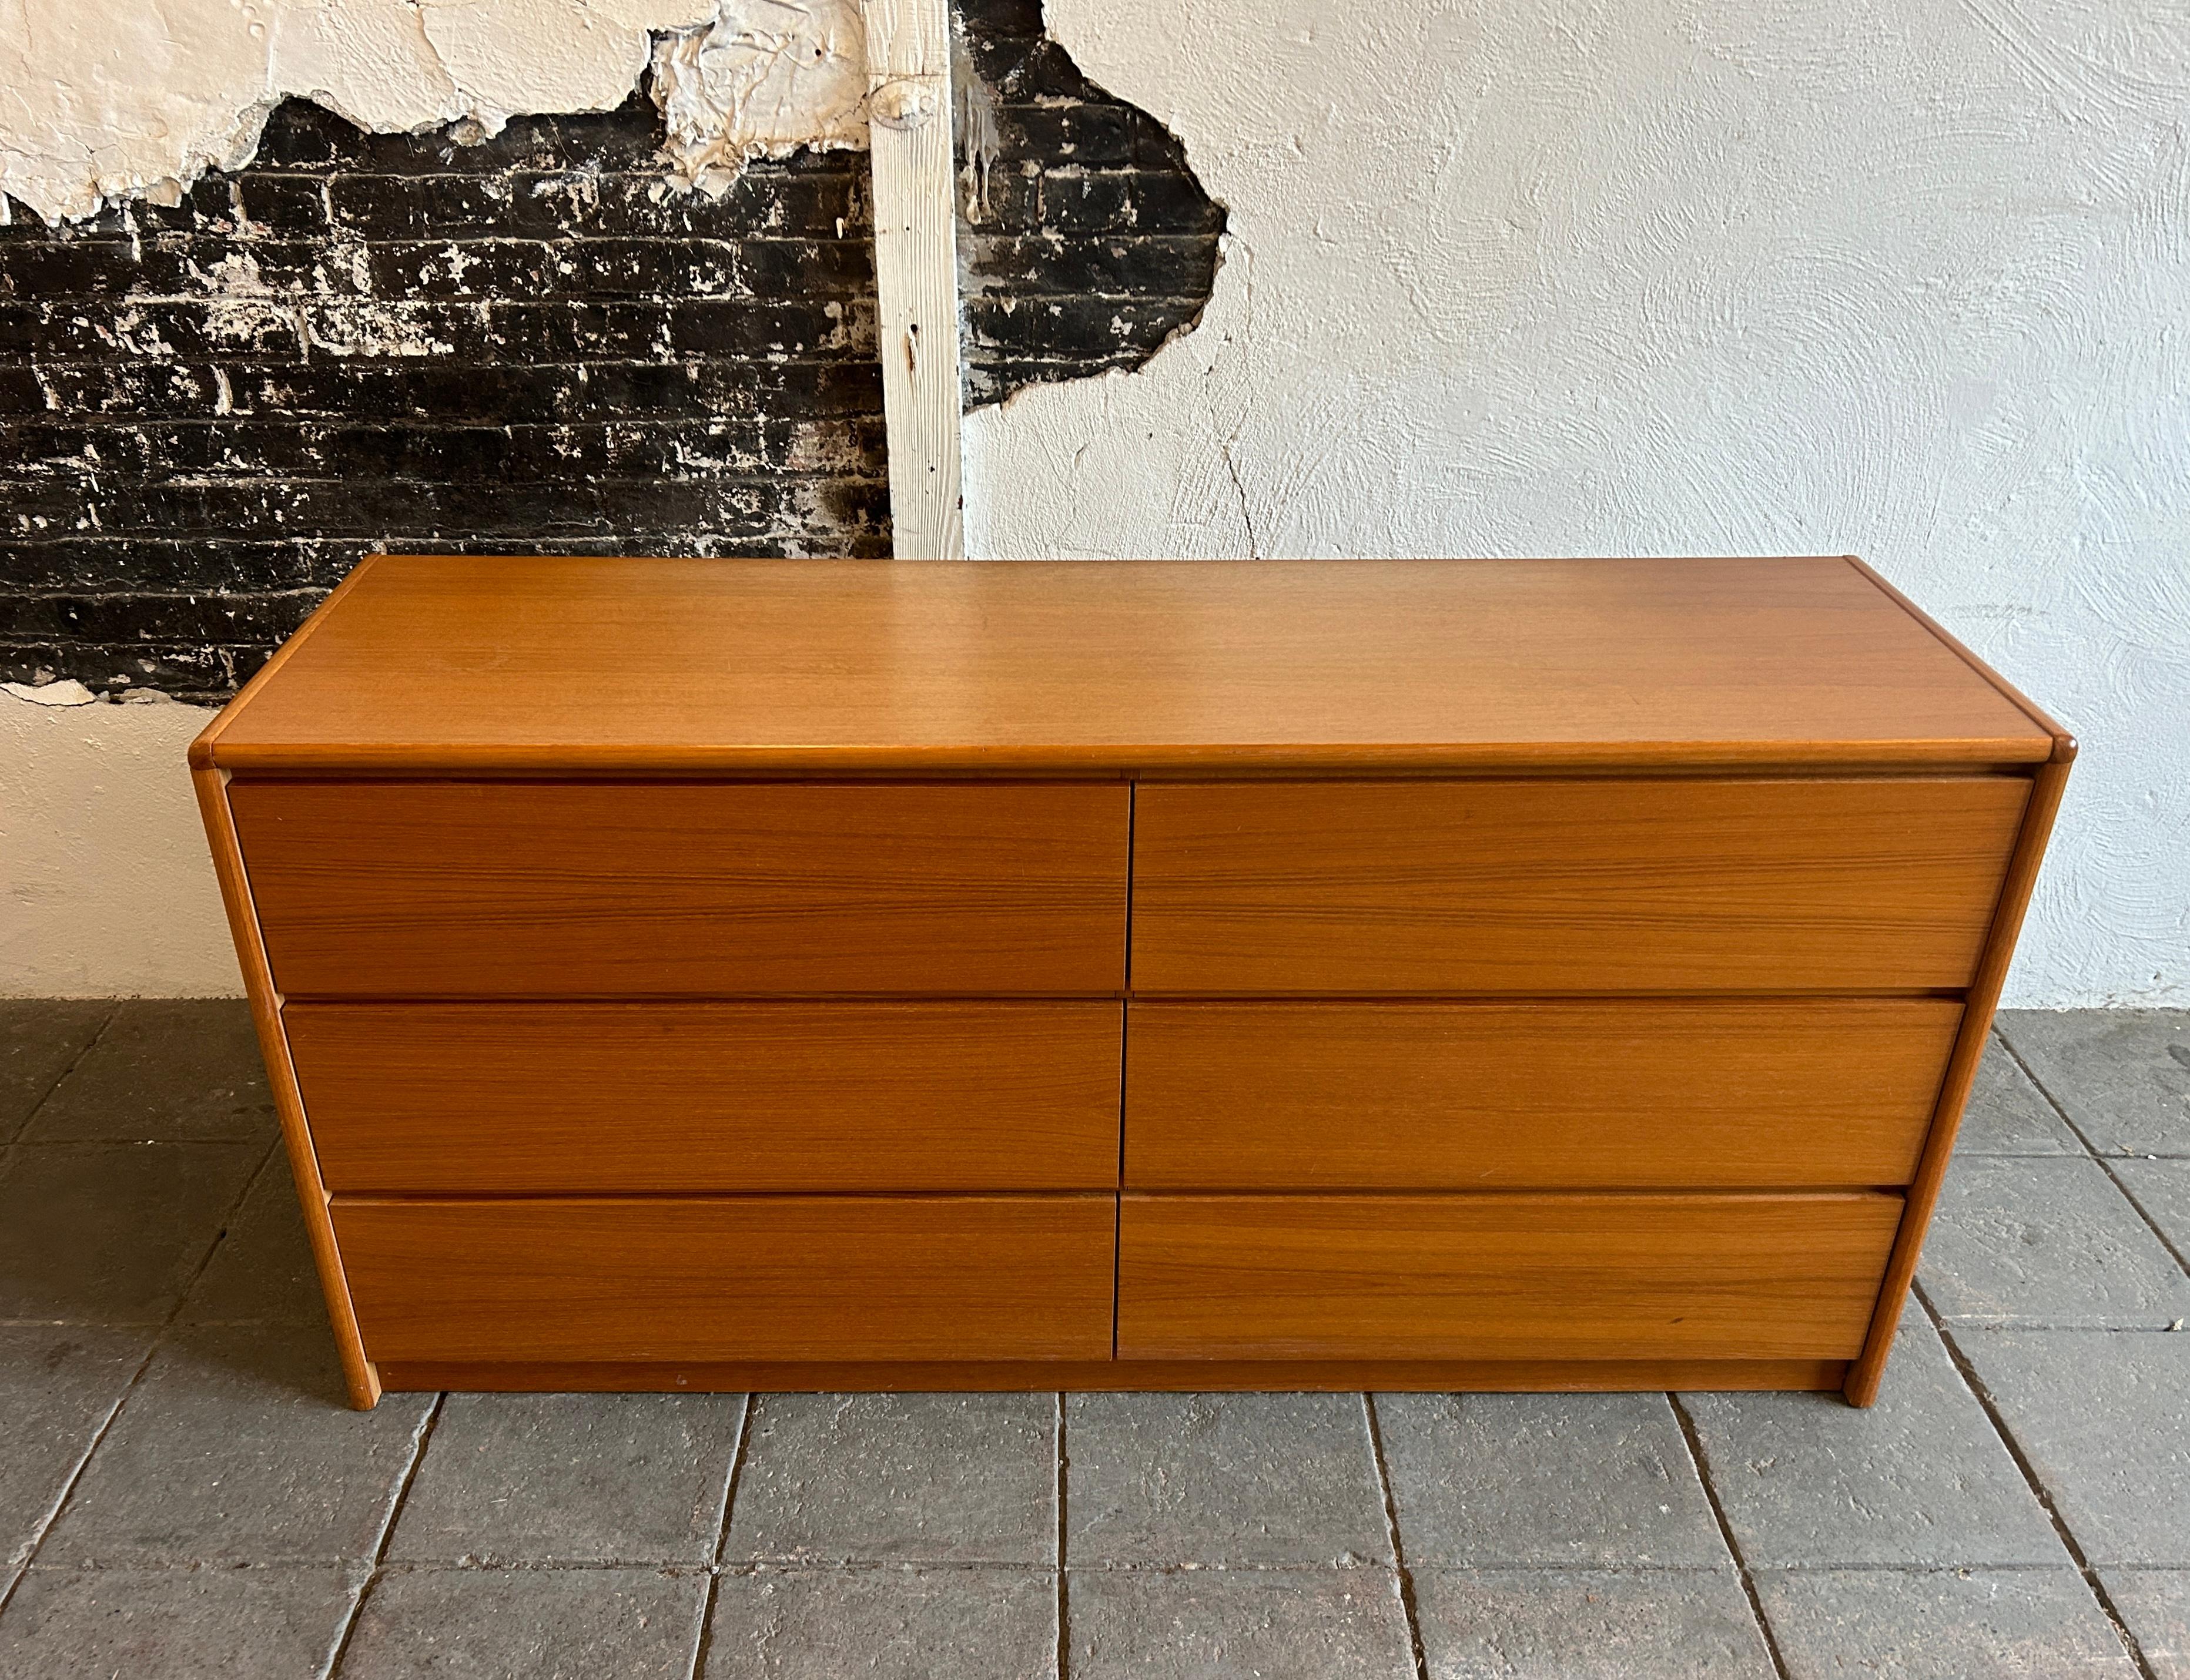 Mid century Danish modern Teak 6 drawer dresser. Clean simple Danish modern dresser with 6 drawers clean inside and out. Has carved lower handle pulls under drawer face. Really beautiful medium brown teak wood with very nice grain. Made in Denmark.